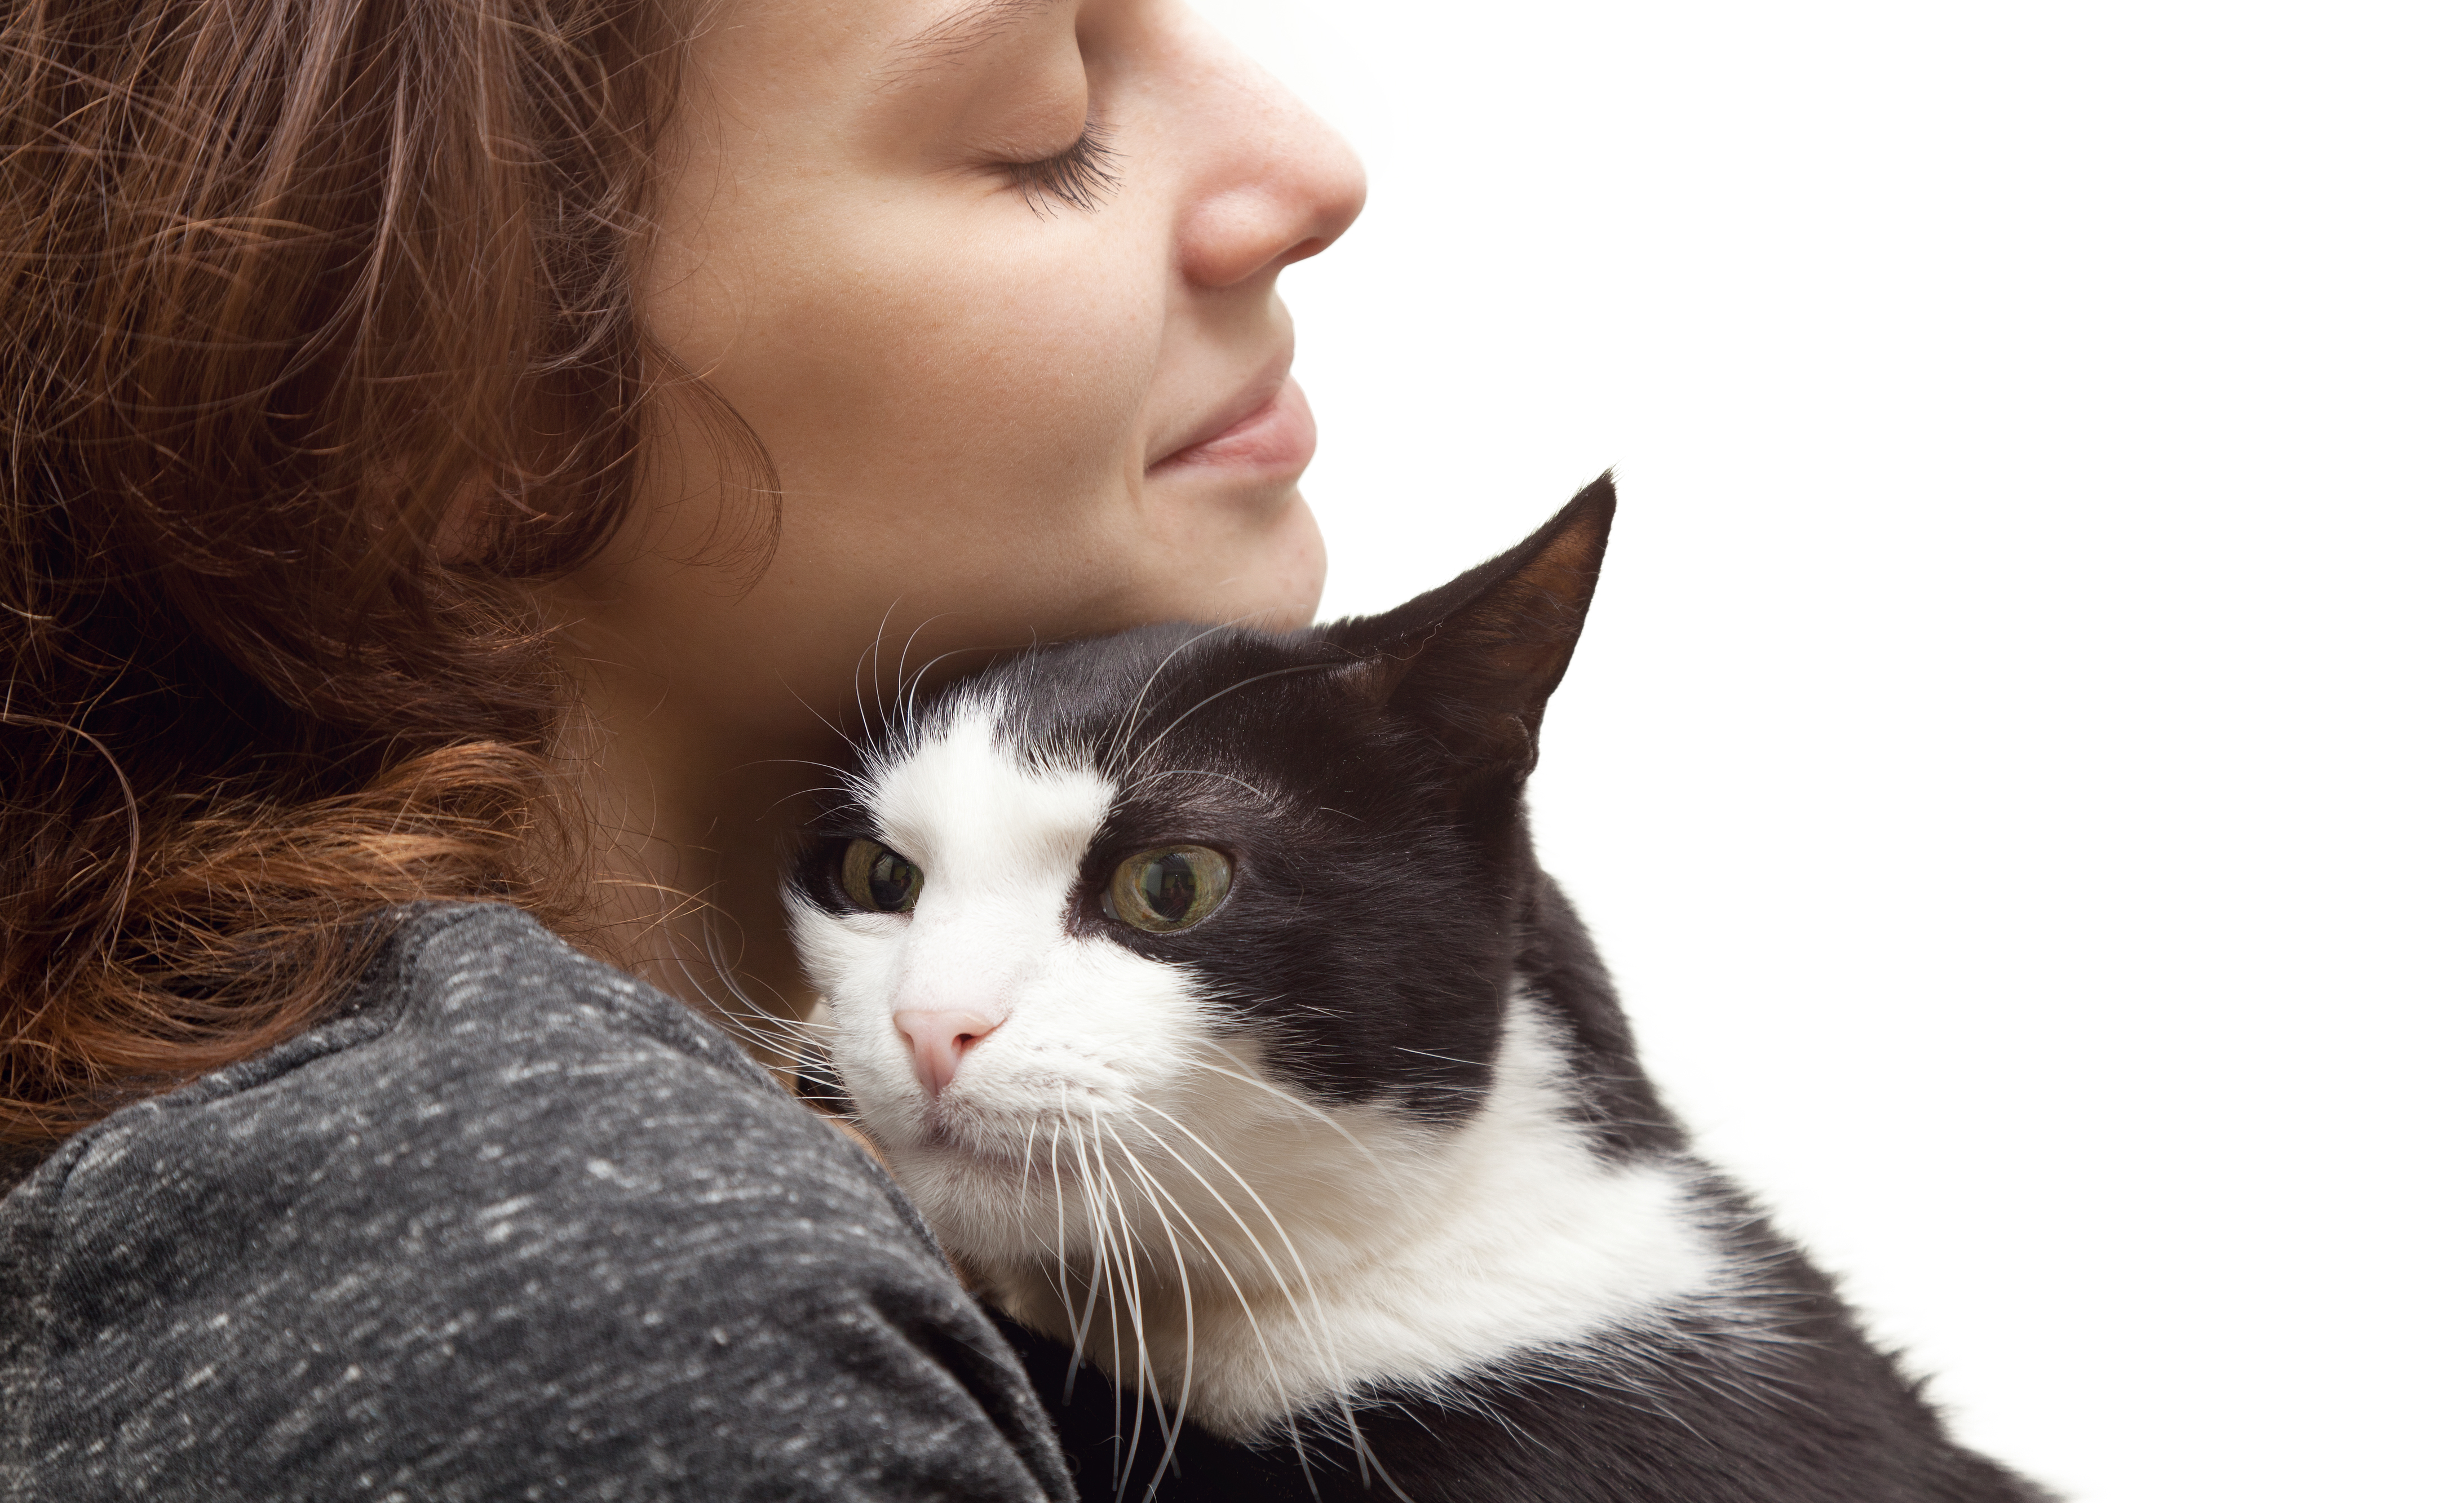 Grief and Healing Resources from Family Animal Services of Portland